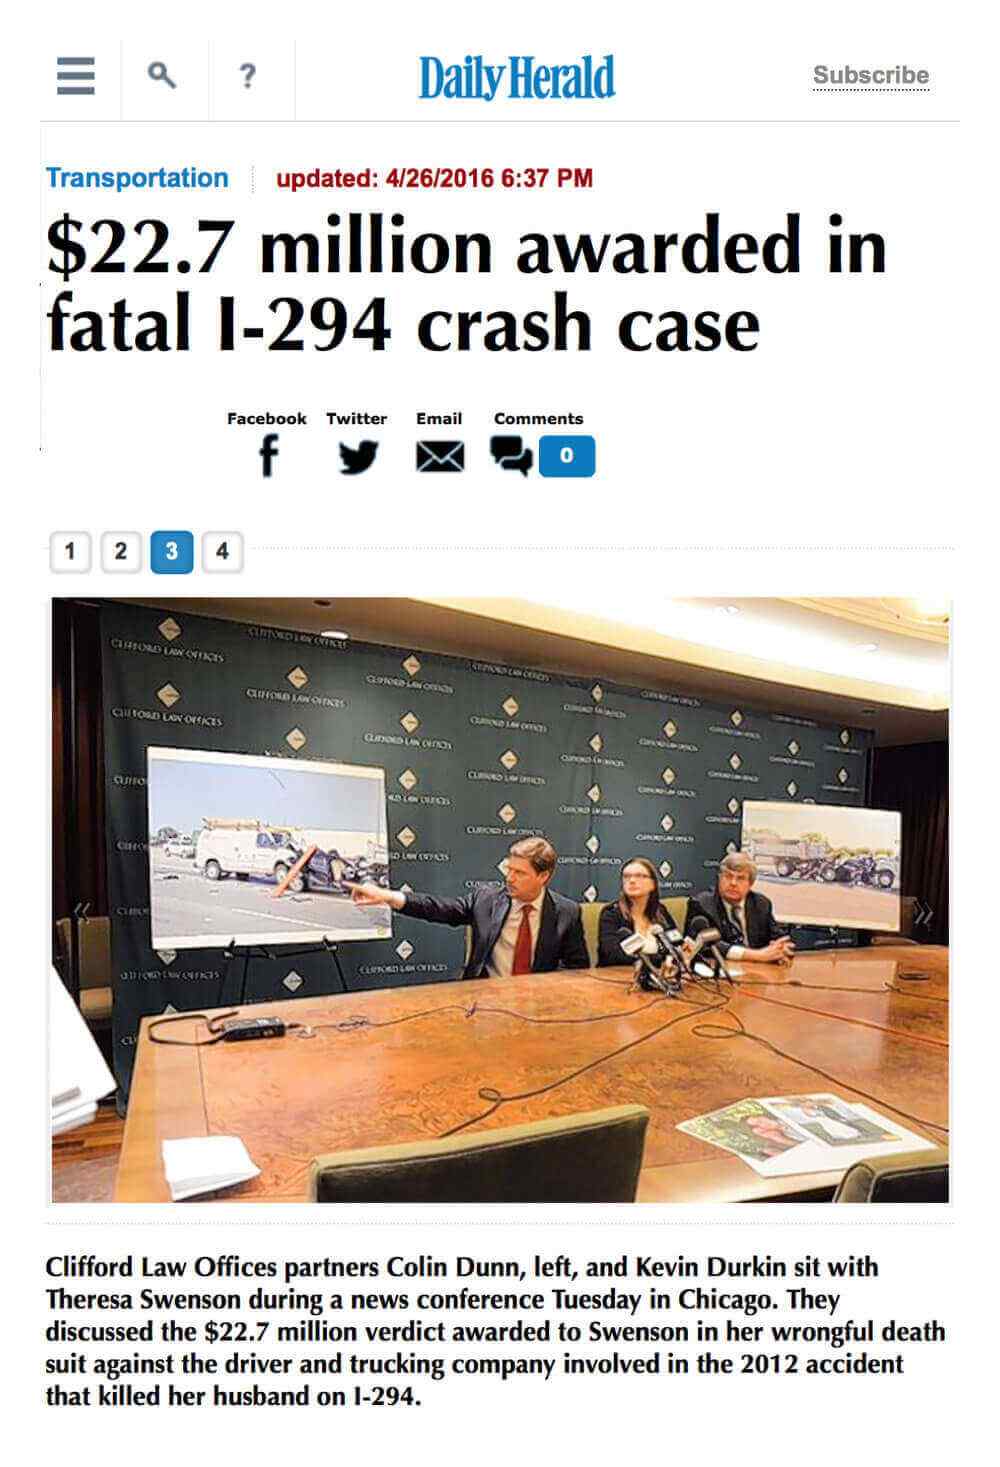 Daily Herald article detailing $22.7 million awarded in fatal I-294 crash cash